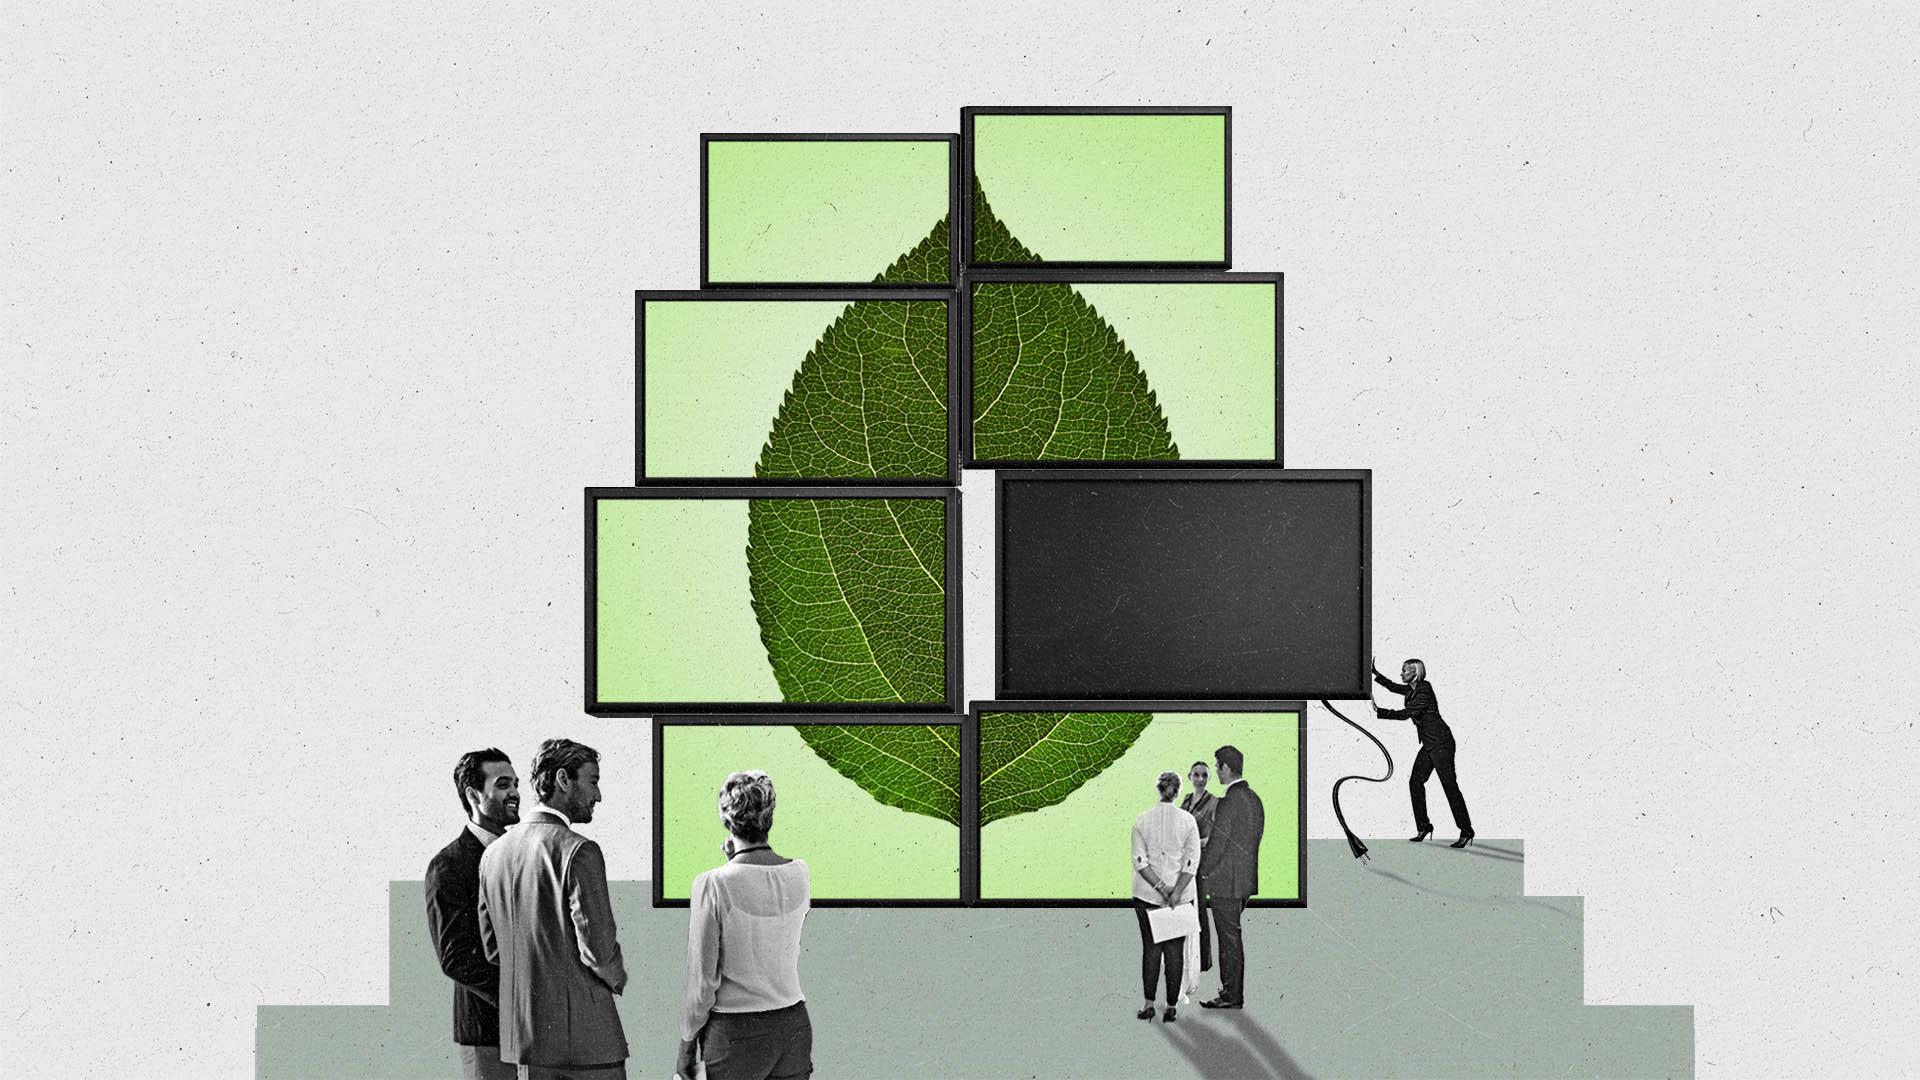 A person completes a set of connected TVs on a peak that combine to depict a leaf as people mingle closely around it.